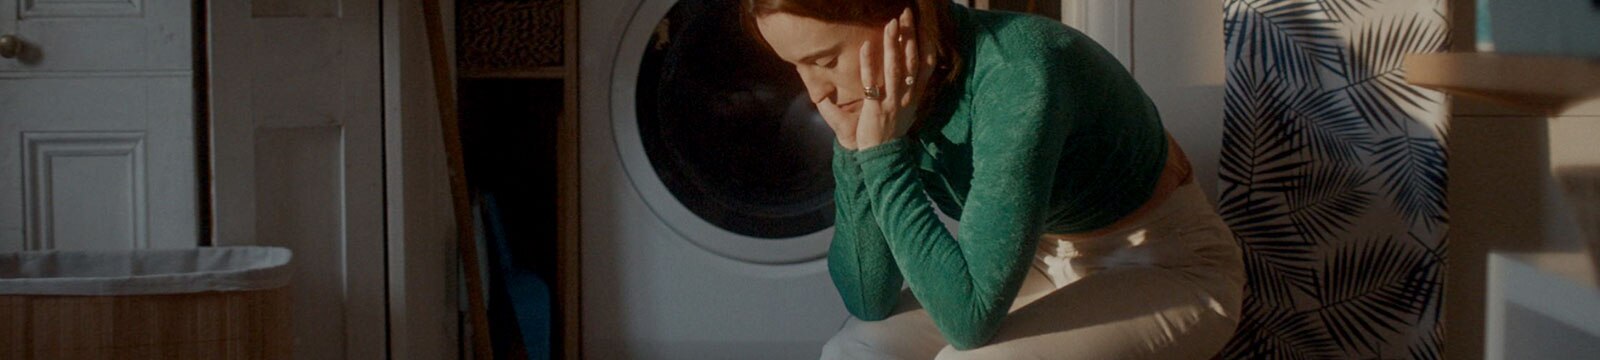 An exhausted woman sits alone in a laundry room